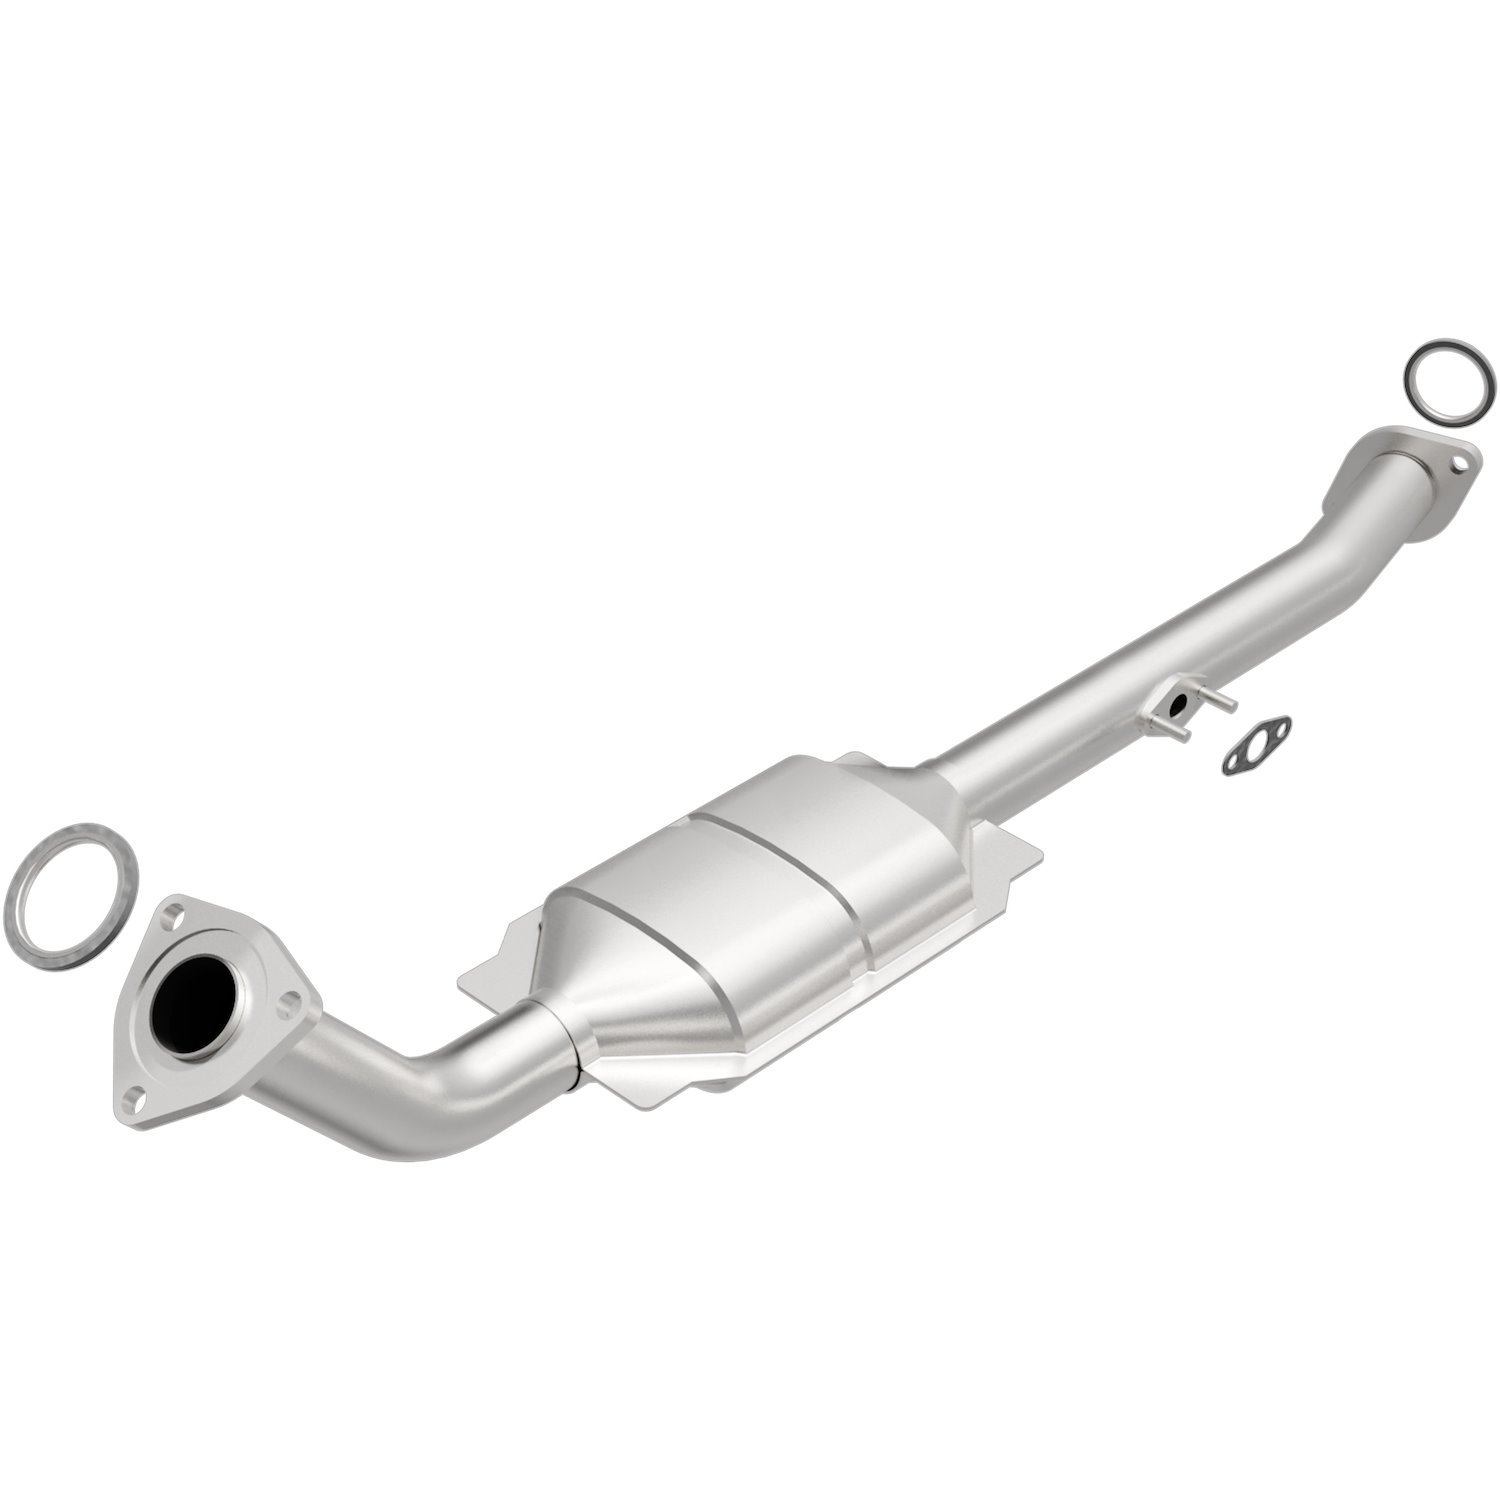 2001-2004 Toyota Sequoia OEM Grade Federal / EPA Compliant Direct-Fit Catalytic Converter